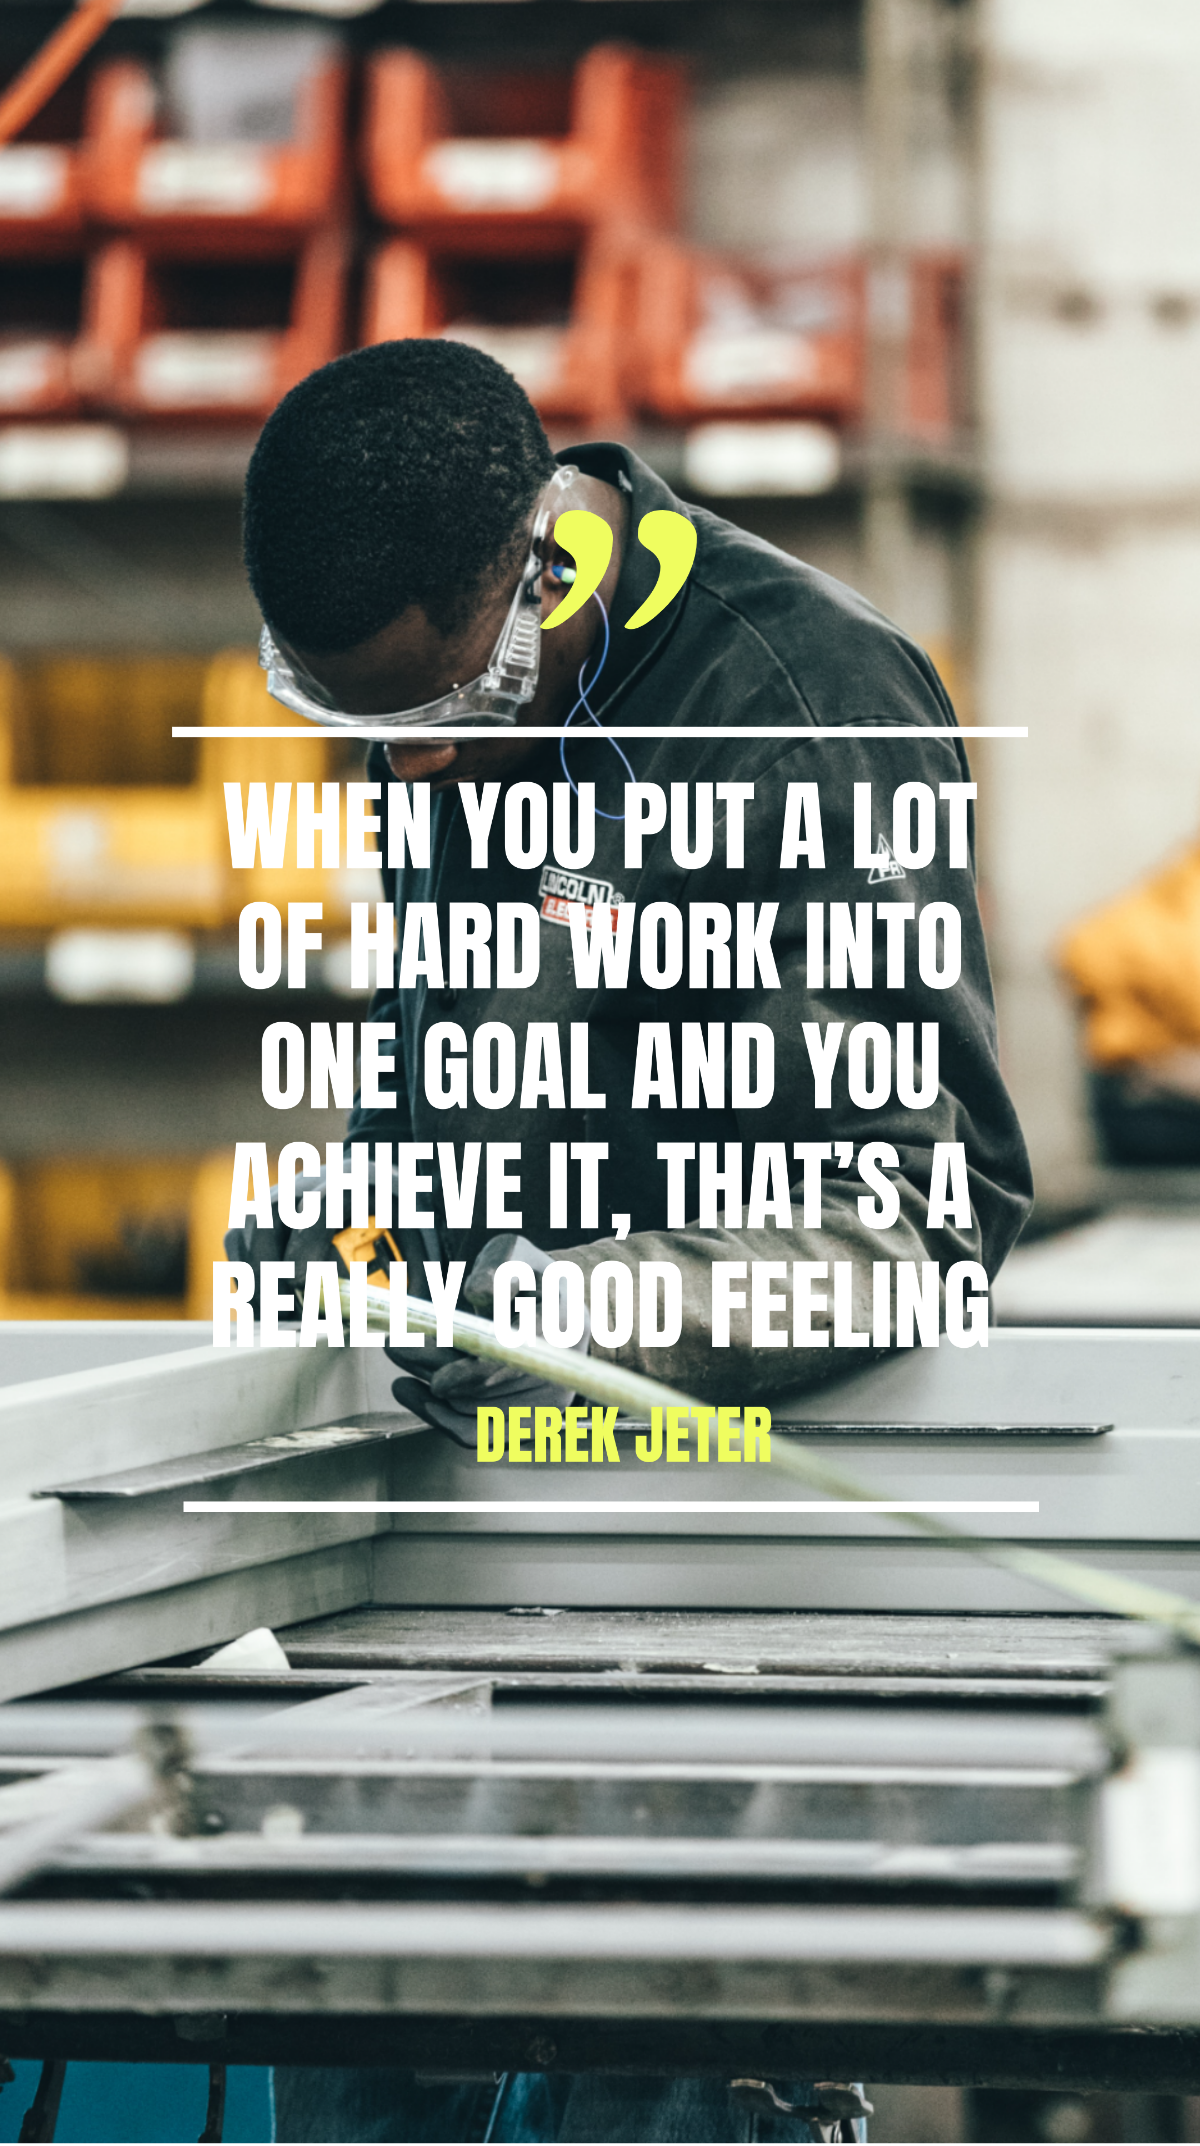 Derek Jeter - When you put a lot of hard work into one goal and you achieve it, that’s a really good feeling. Template